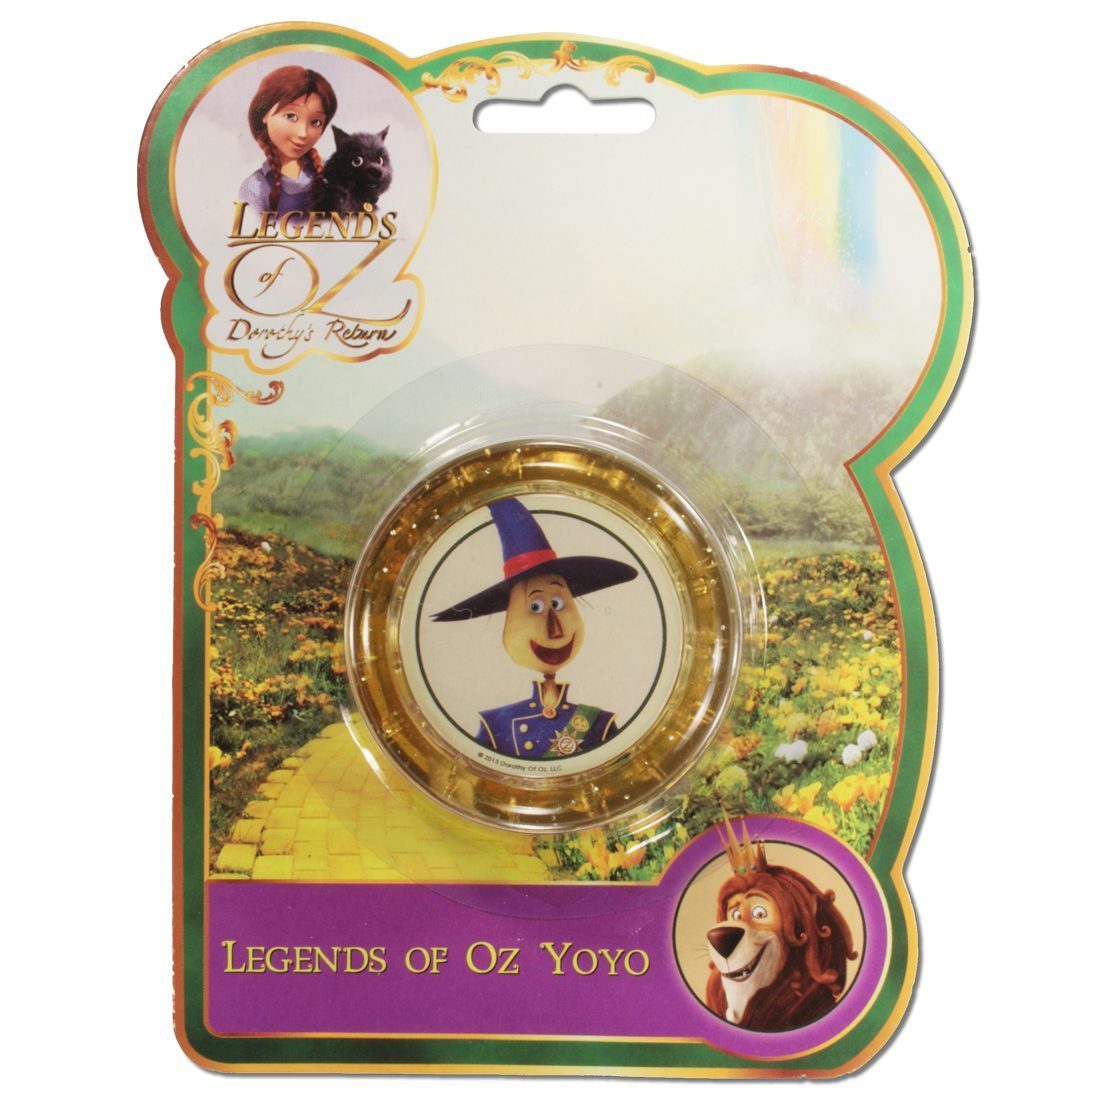 The Wizard of Oz "Legends of Oz" YoYo - Coins & Stamps